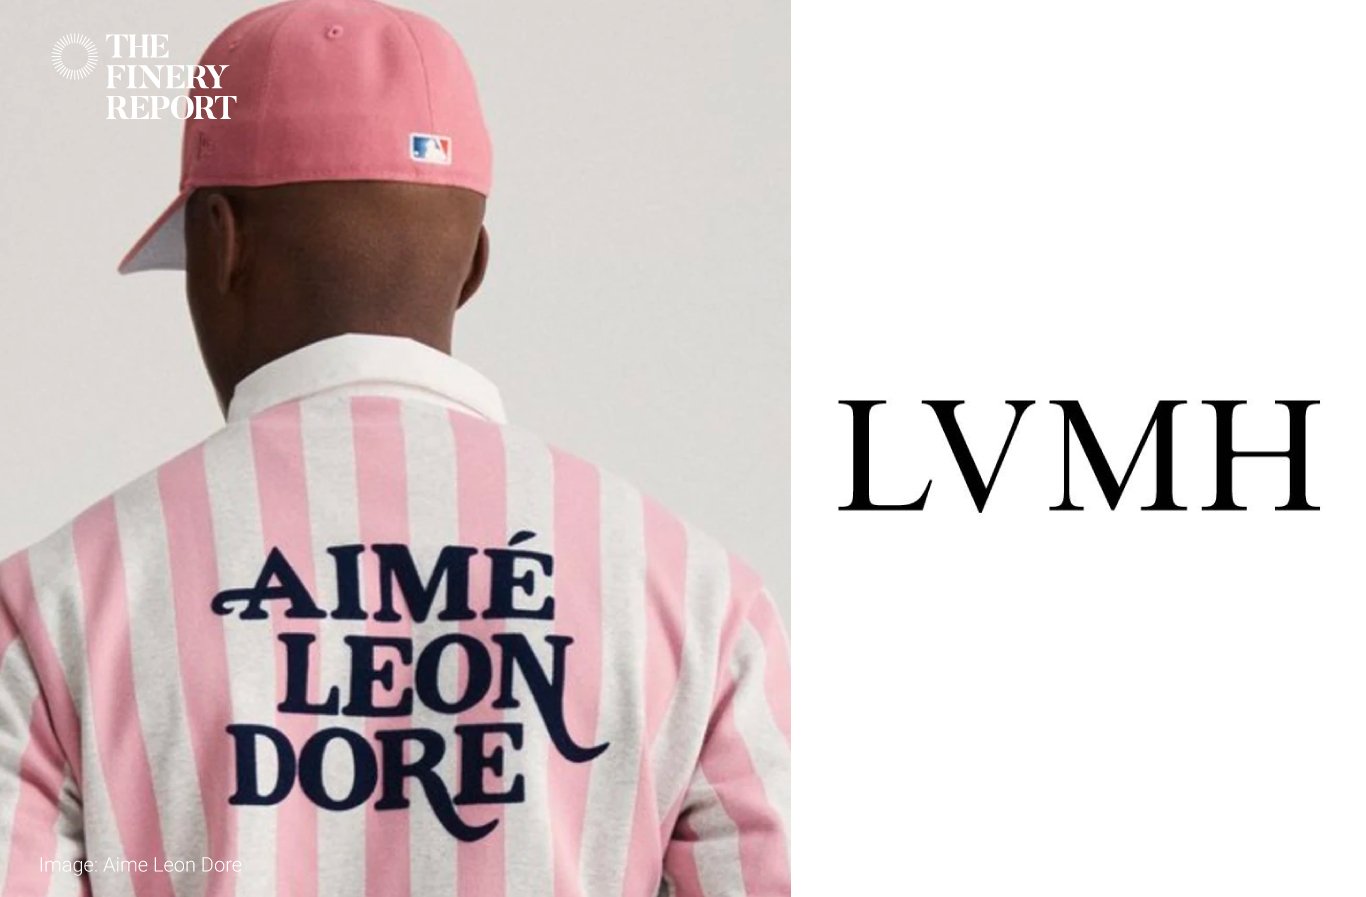 LVMH acquires minority stake in fashion and lifestyle brand Aimé